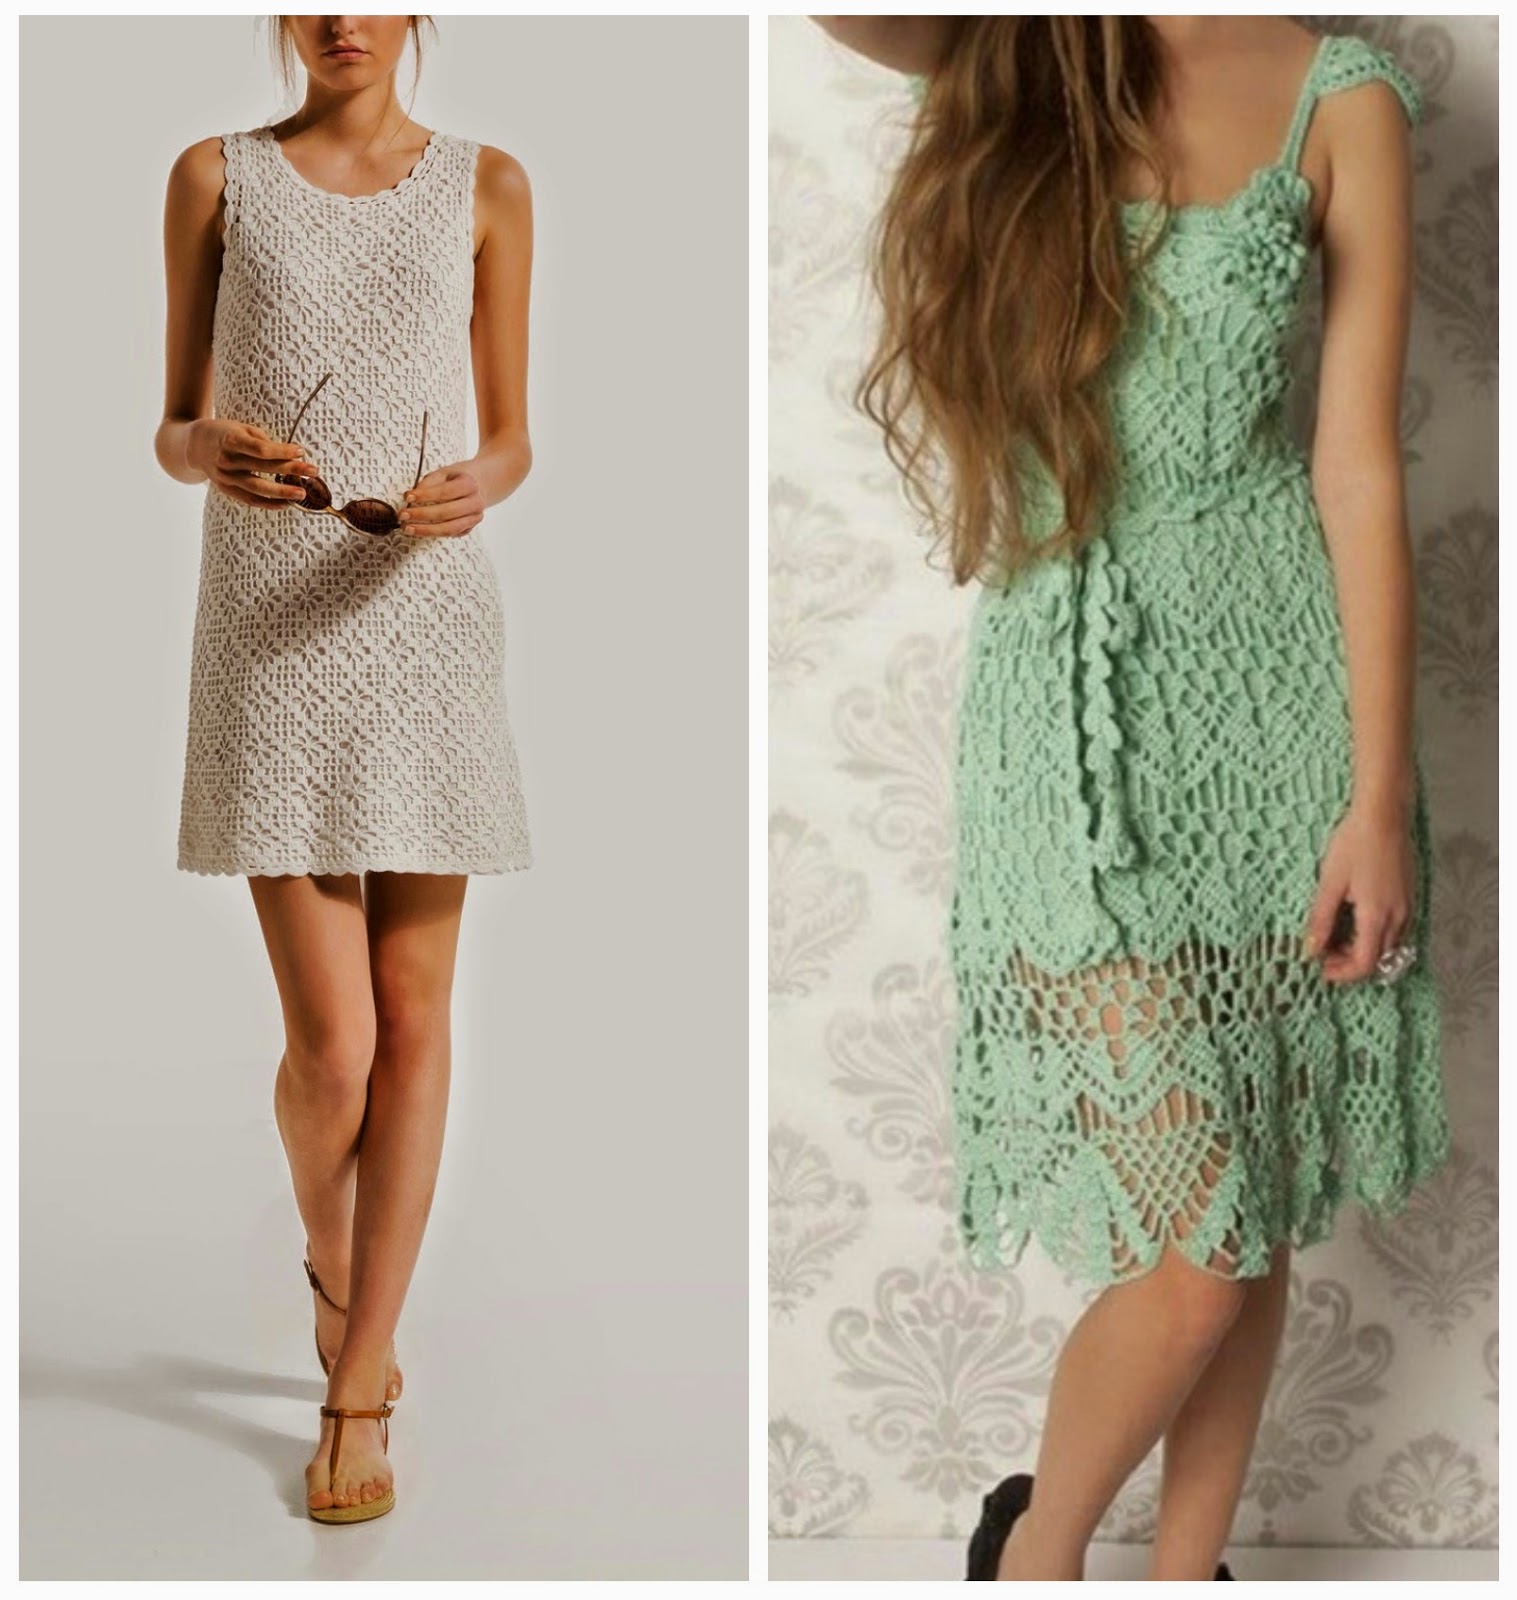 Little Treasures: 15 Crochet Dresses - free patterns and charts